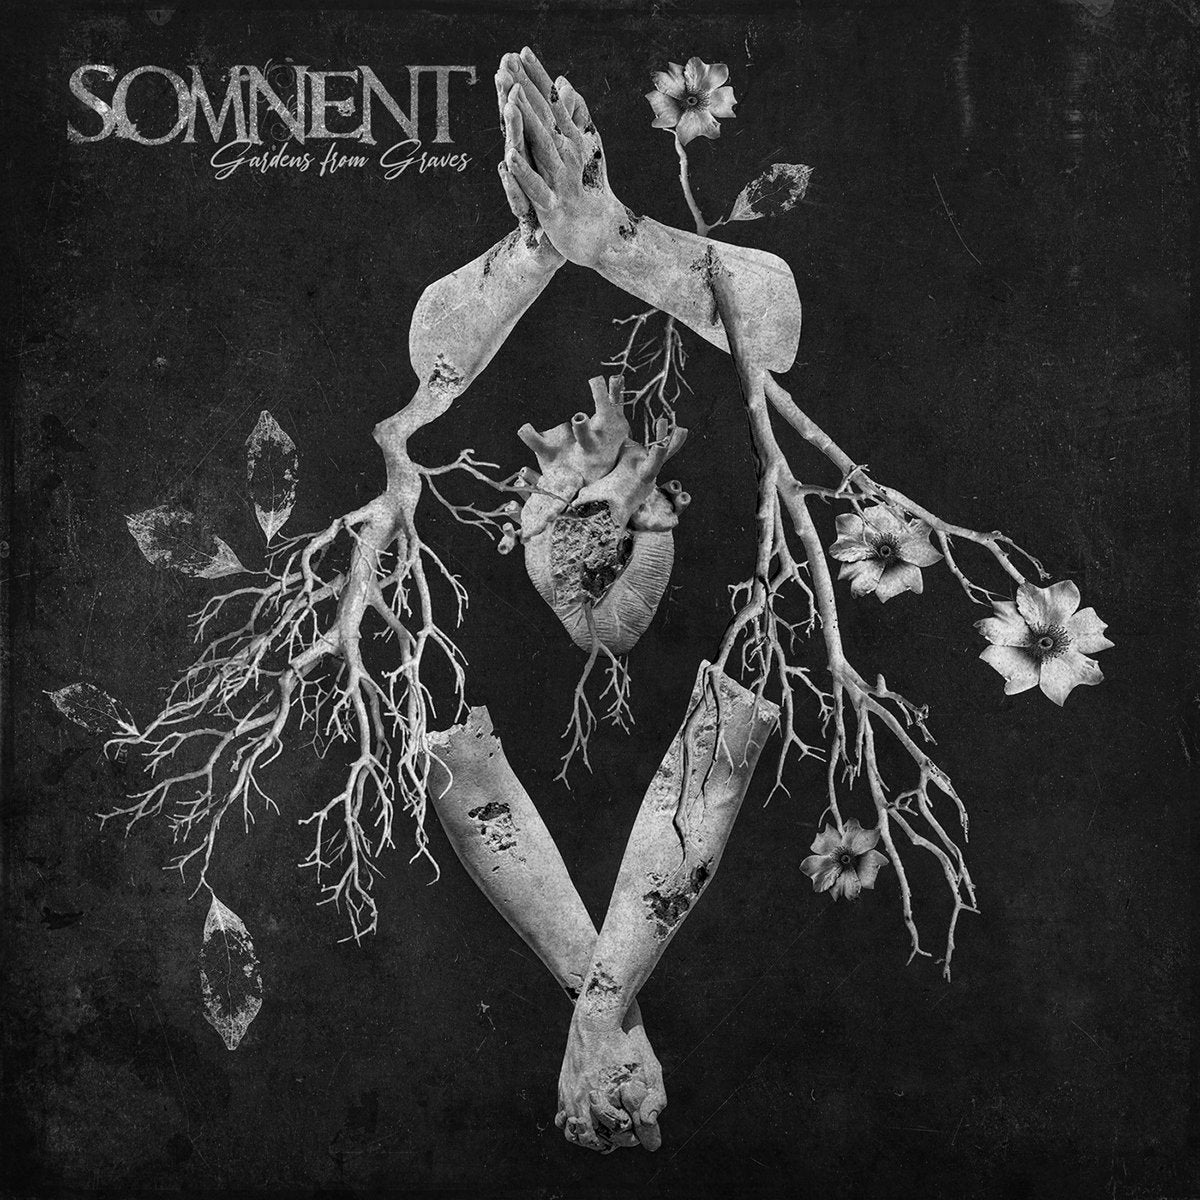 SOMNENT - Gardens From Graves (2 x 12")